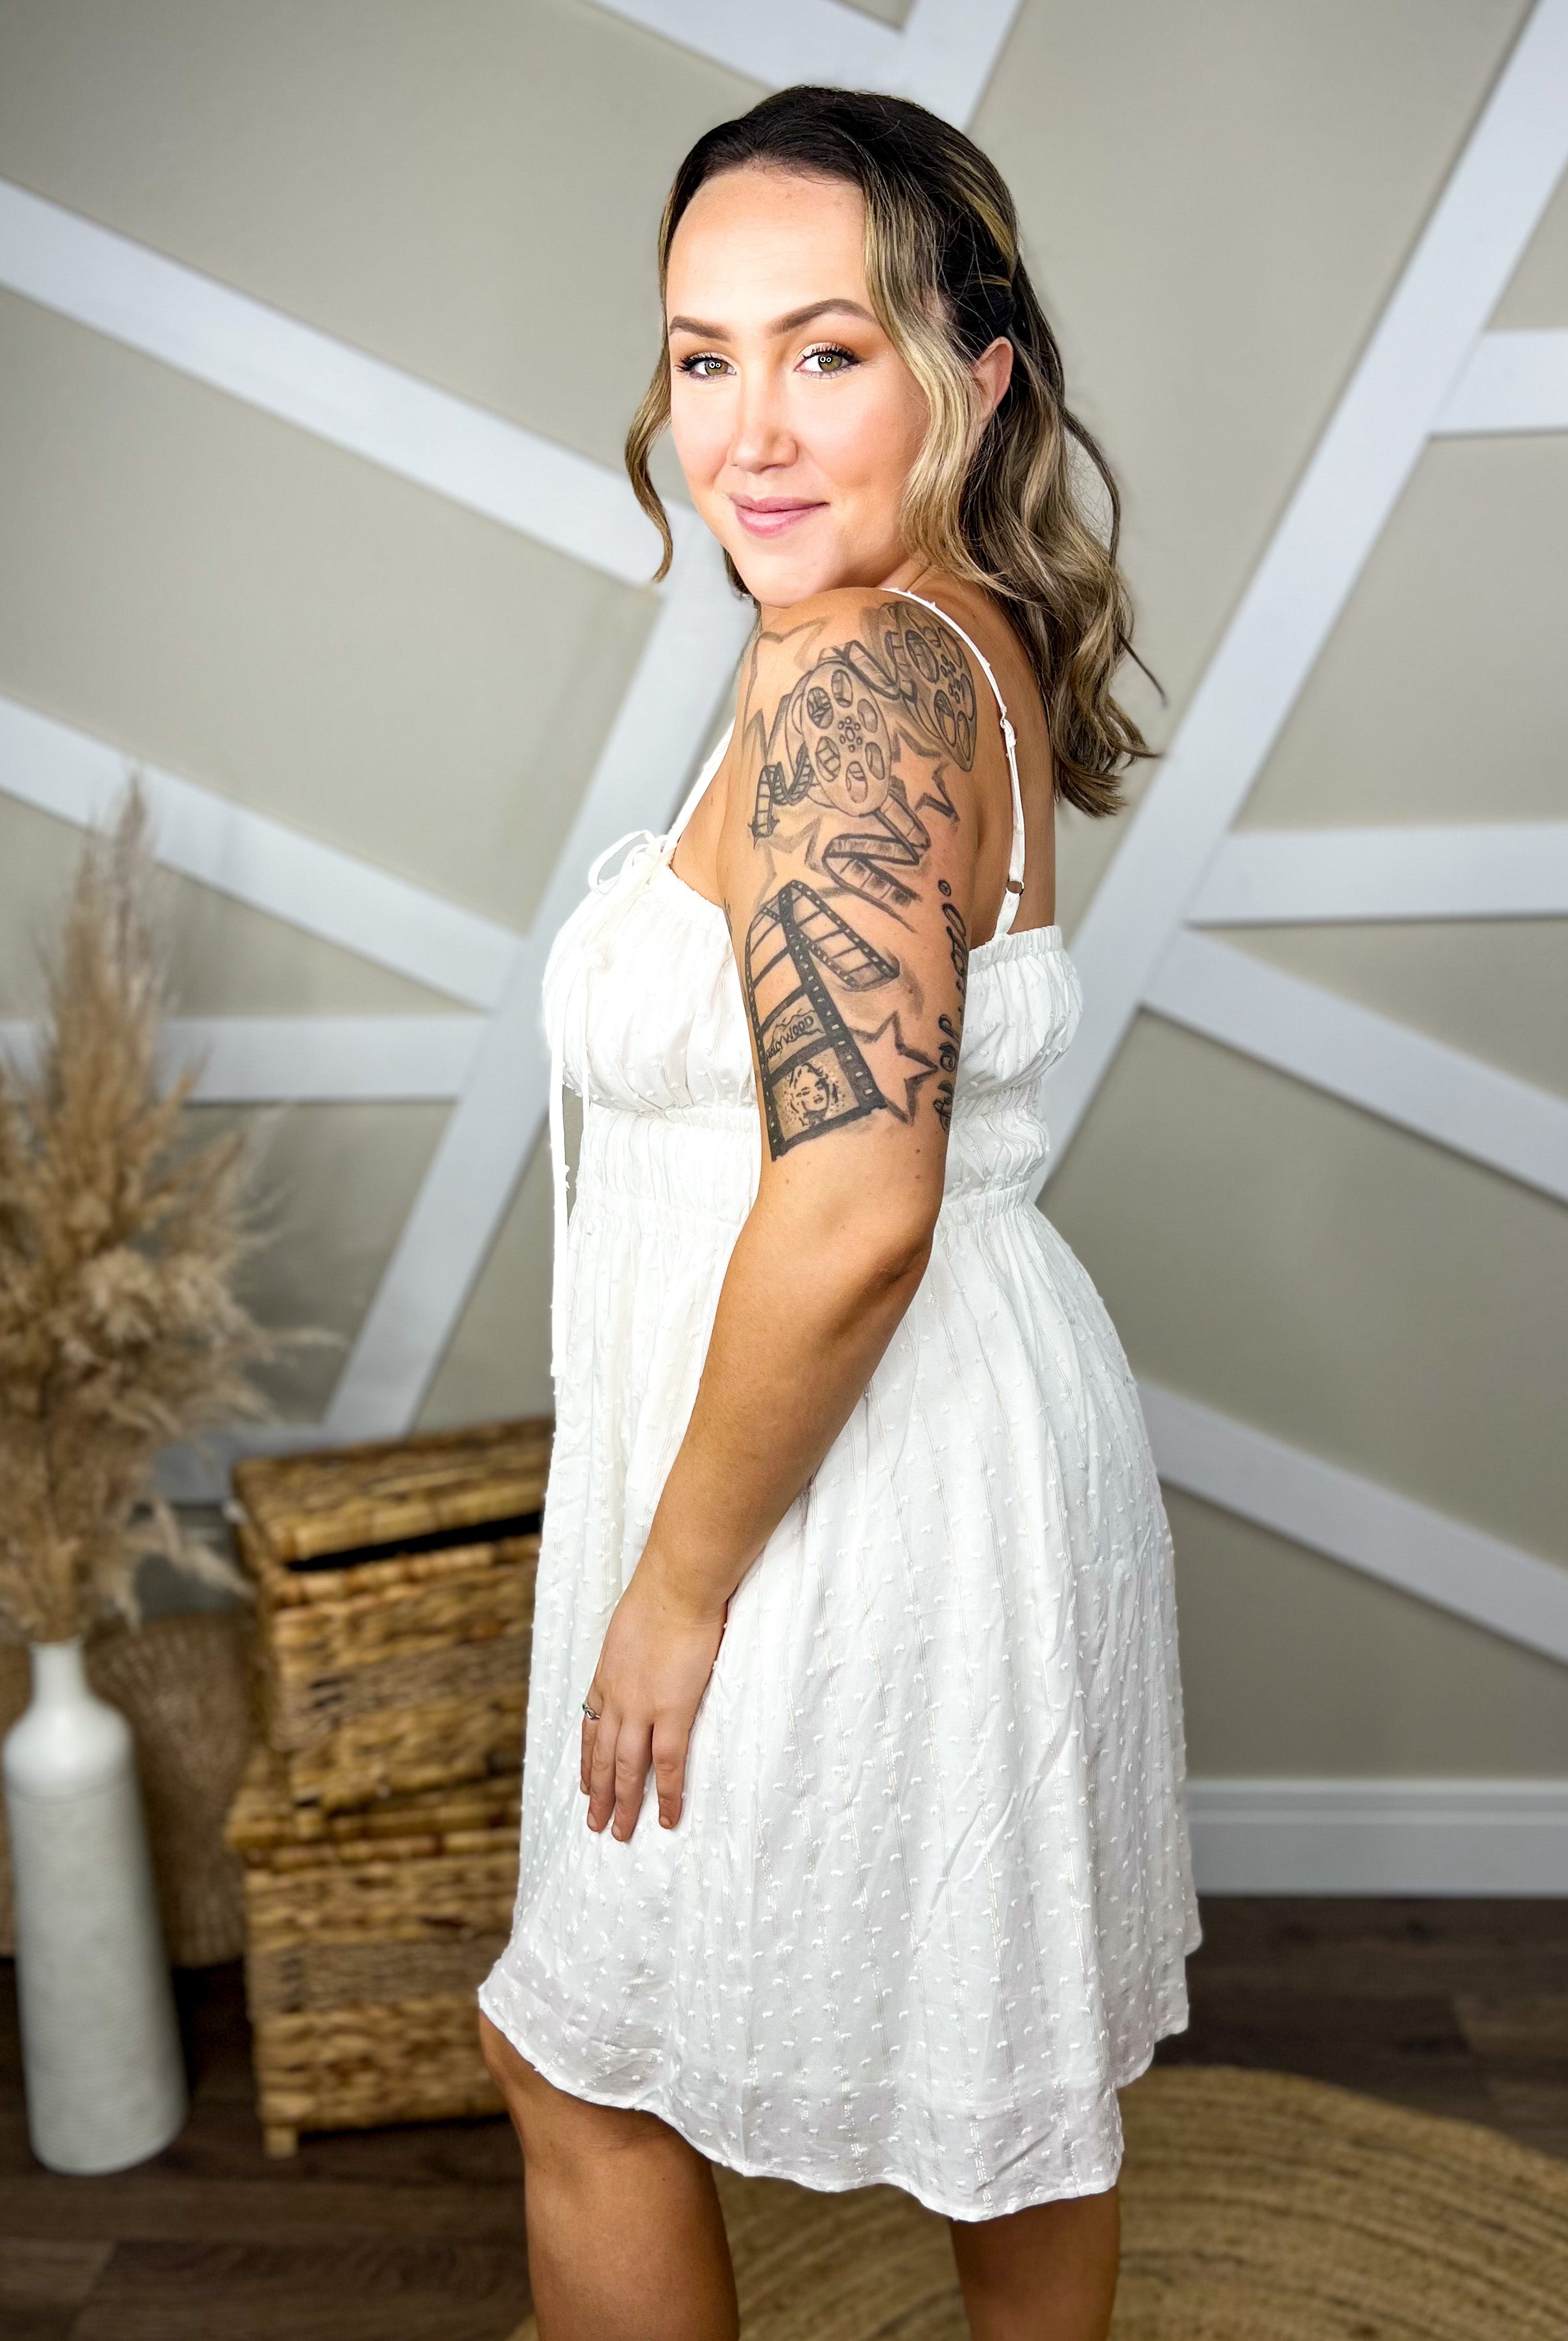 RESTOCK : The Engagement Dress-230 Dresses/Jumpsuits/Rompers-White Birch-Heathered Boho Boutique, Women's Fashion and Accessories in Palmetto, FL